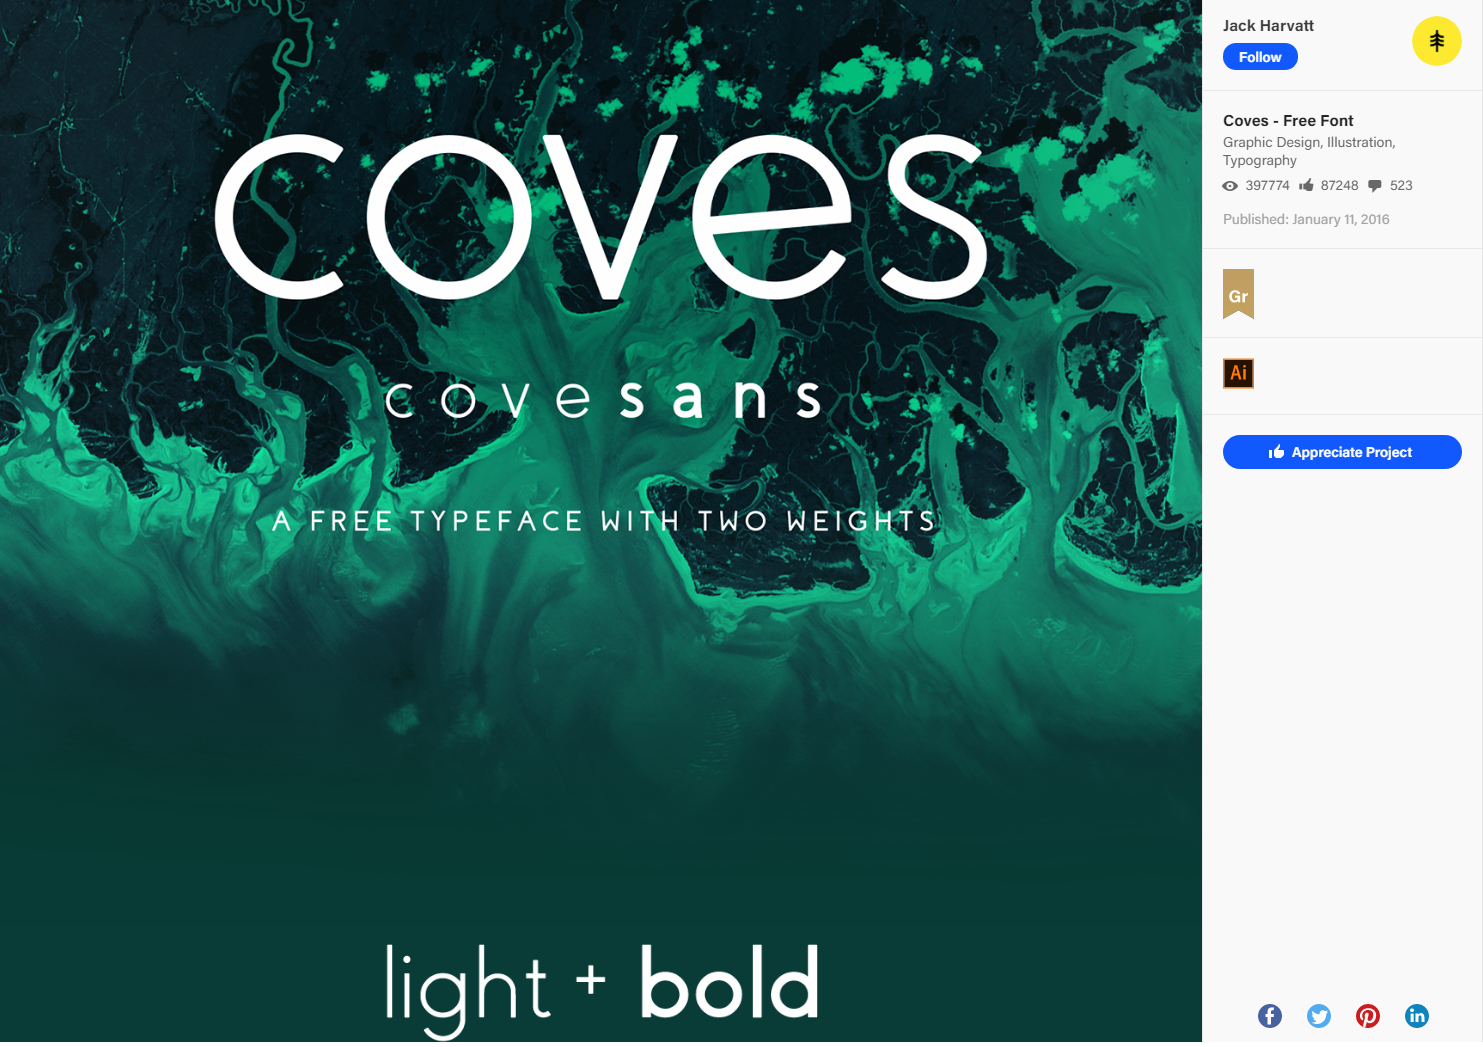 Coves - Free Font on Behance